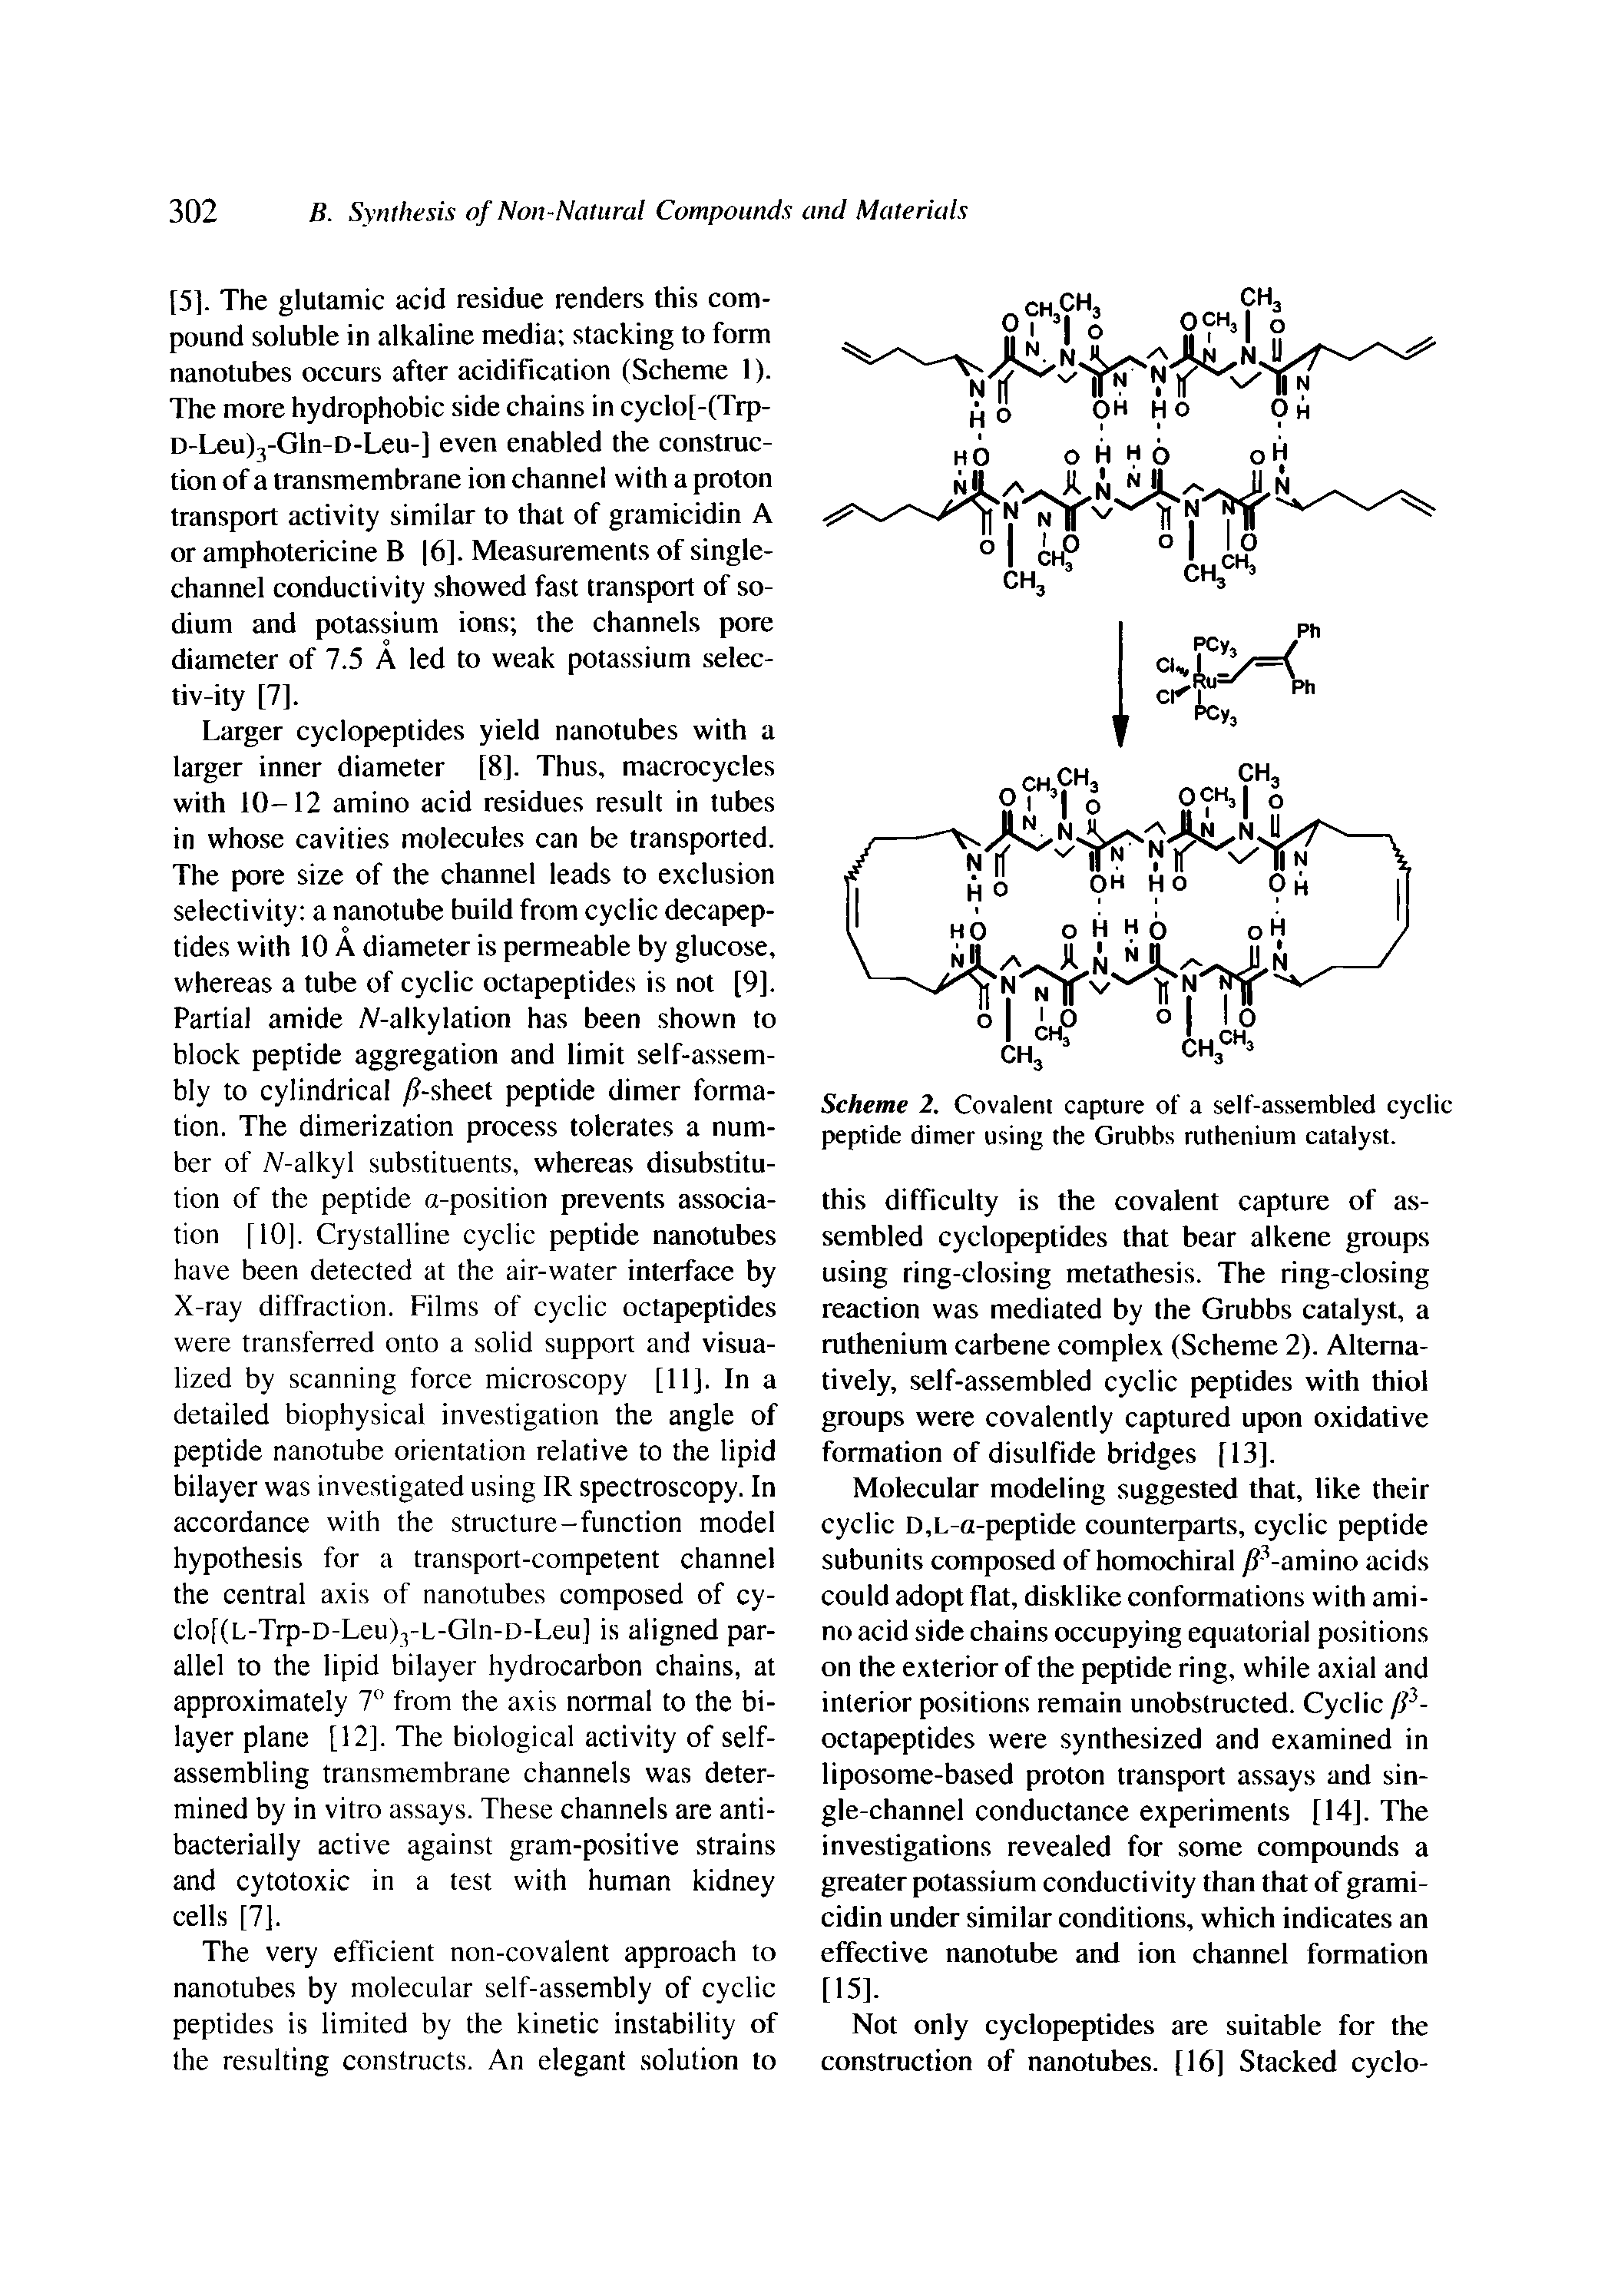 Scheme 2. Covalent capture of a self-assembled cyclic peptide dimer using the Grubbs ruthenium catalyst.